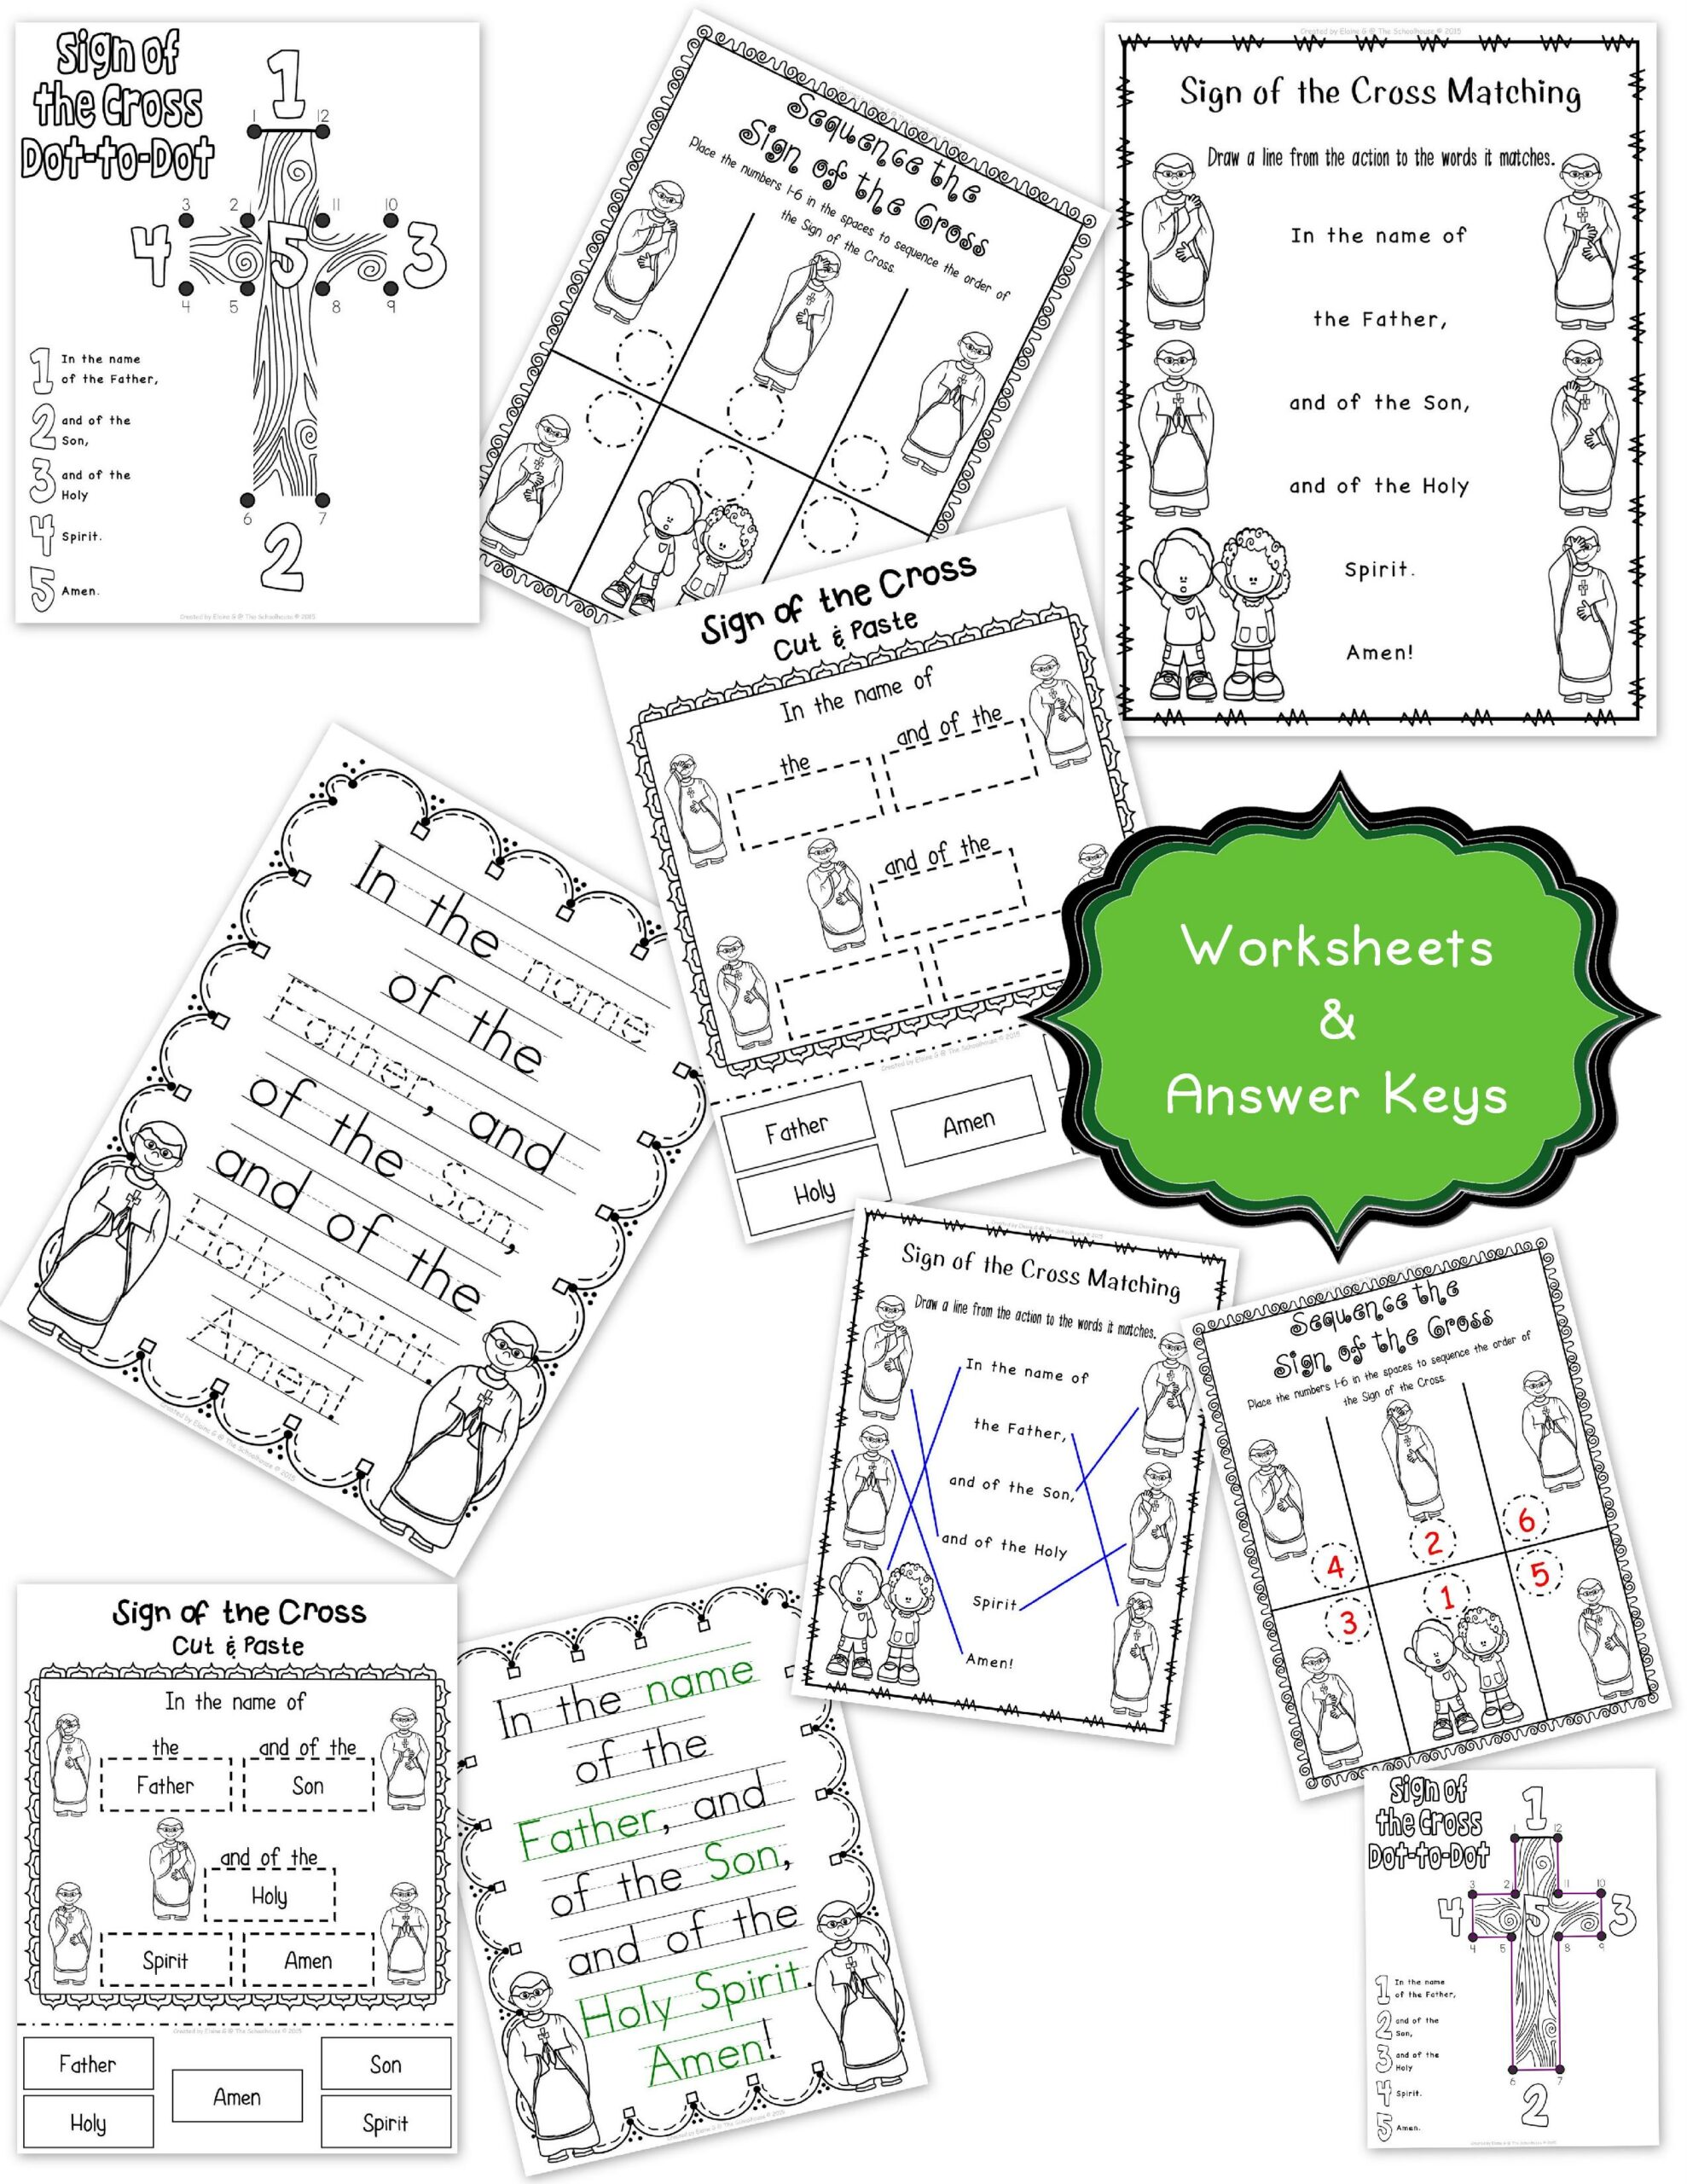 Sign of the cross worksheet pack and posters made by teachers